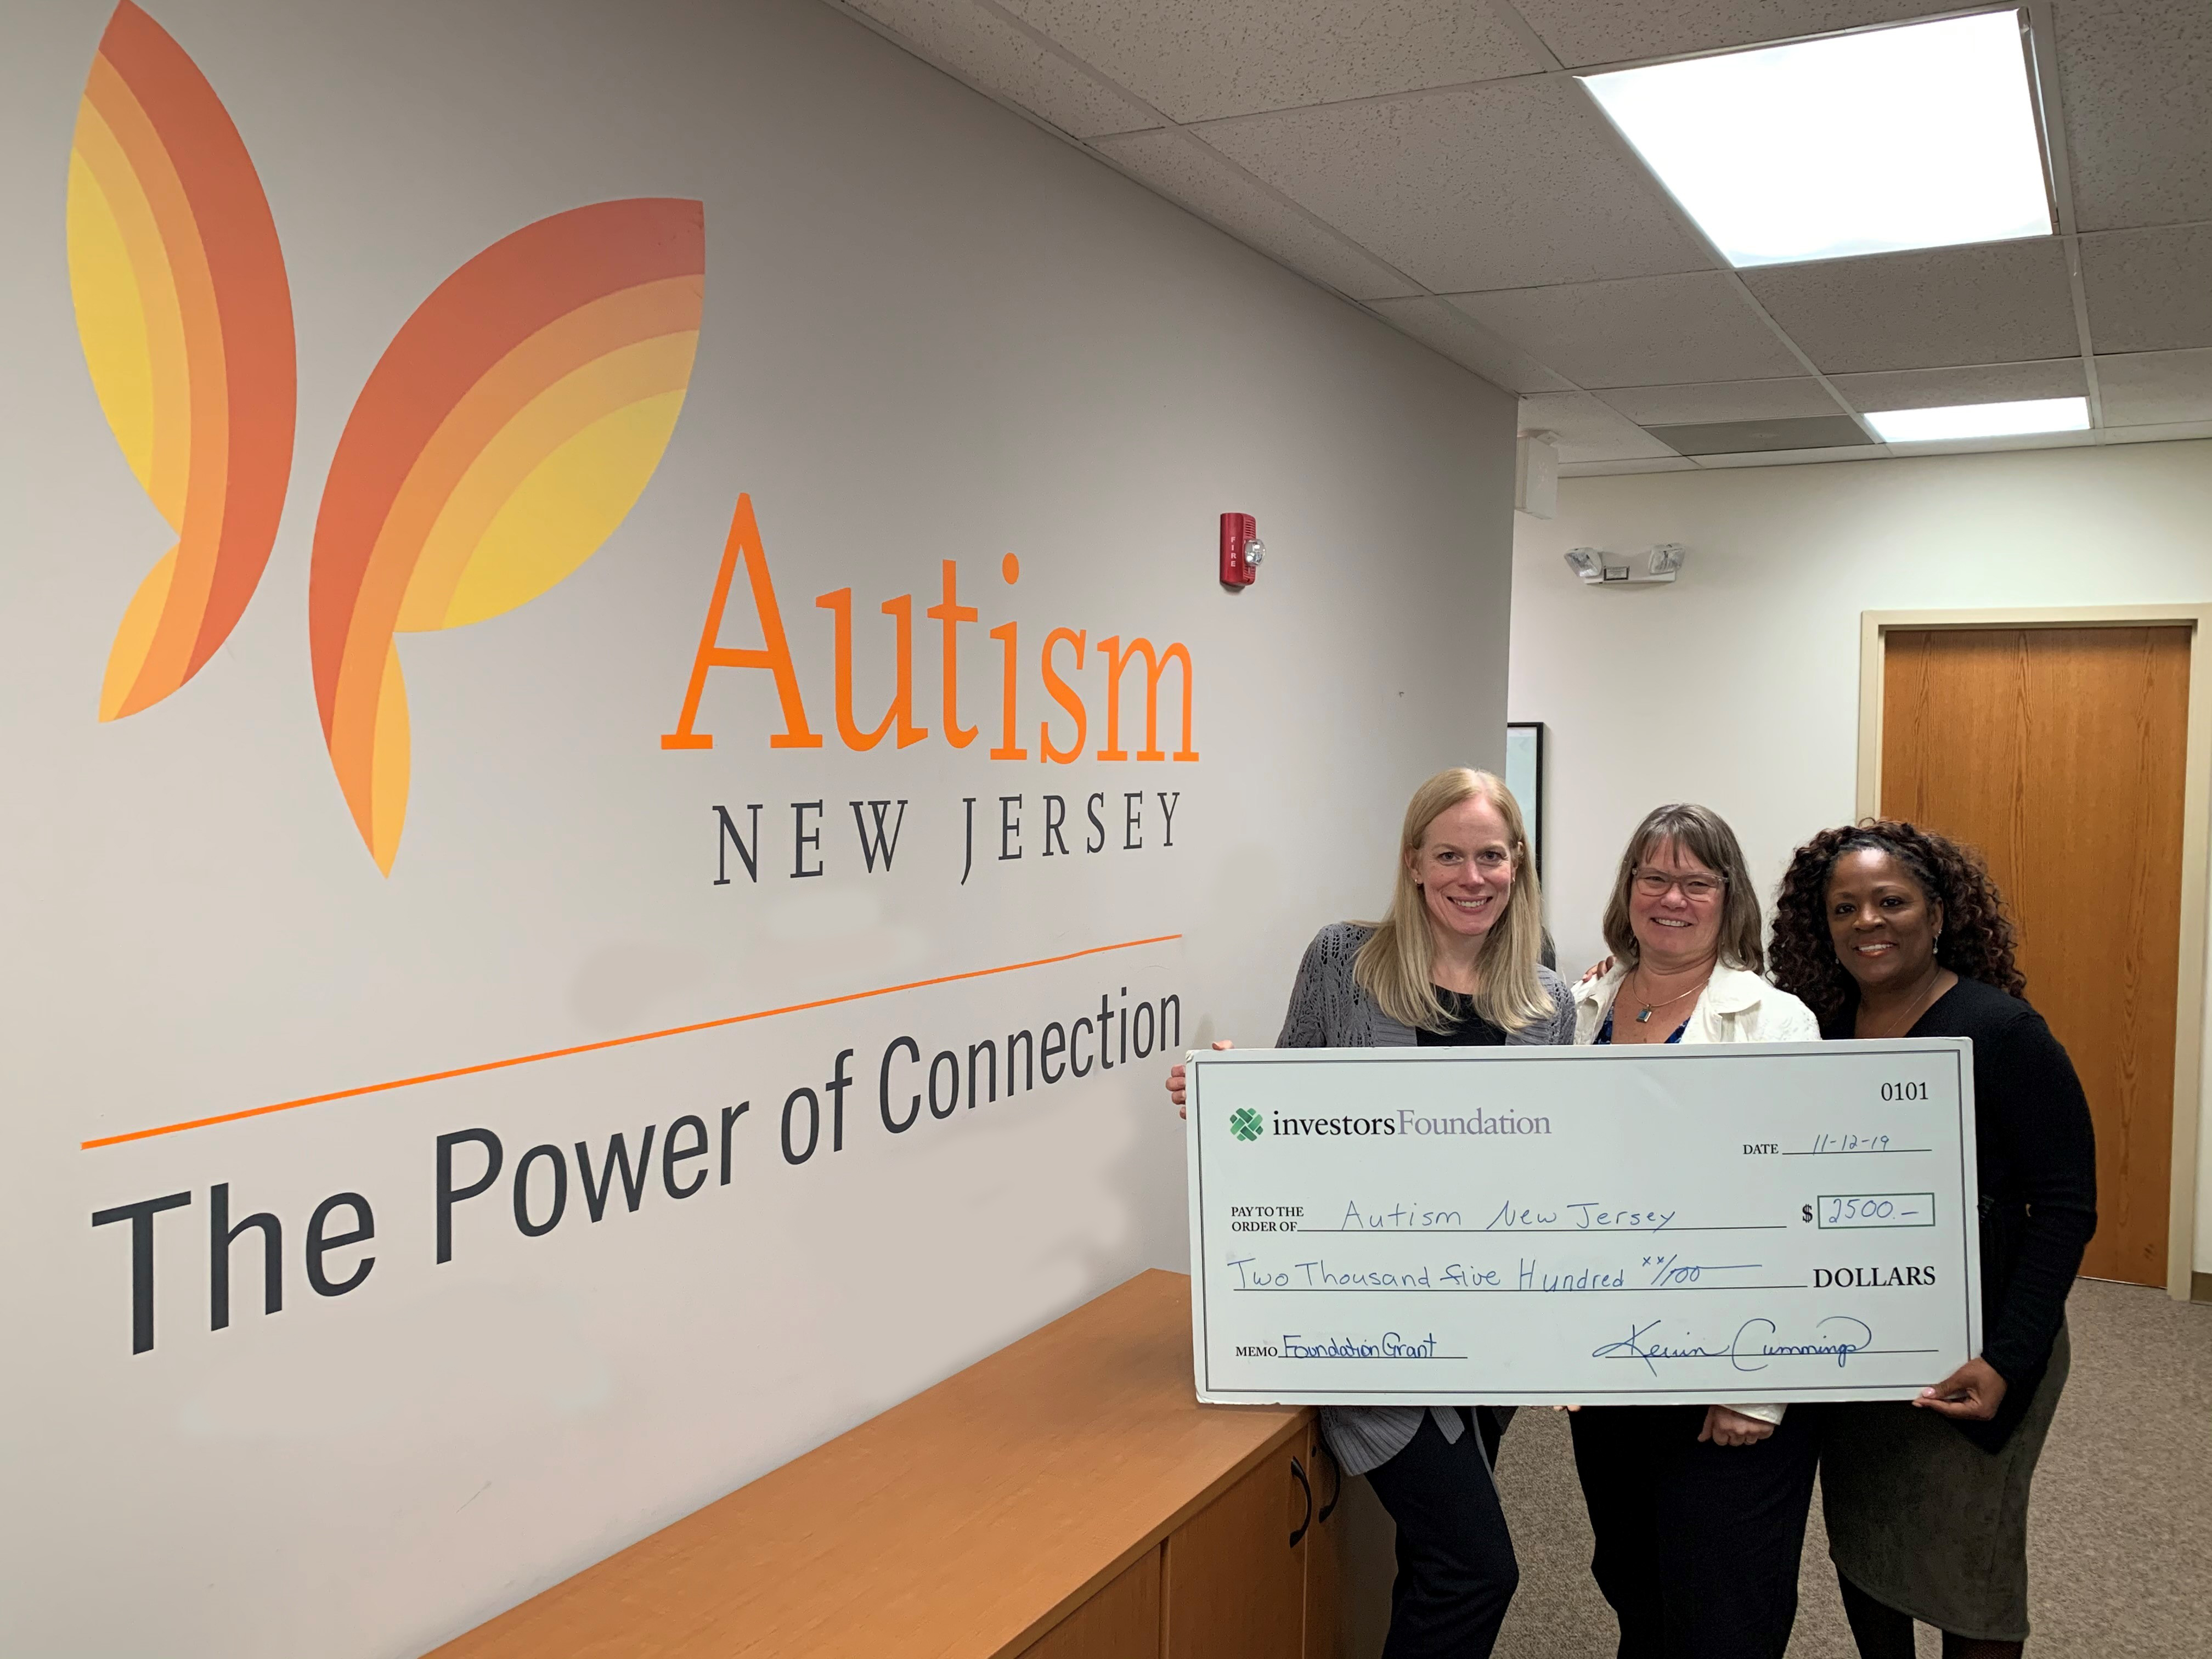 Autism New Jersey Executive Director Suzanne Buchanan with Investors Bank representatives